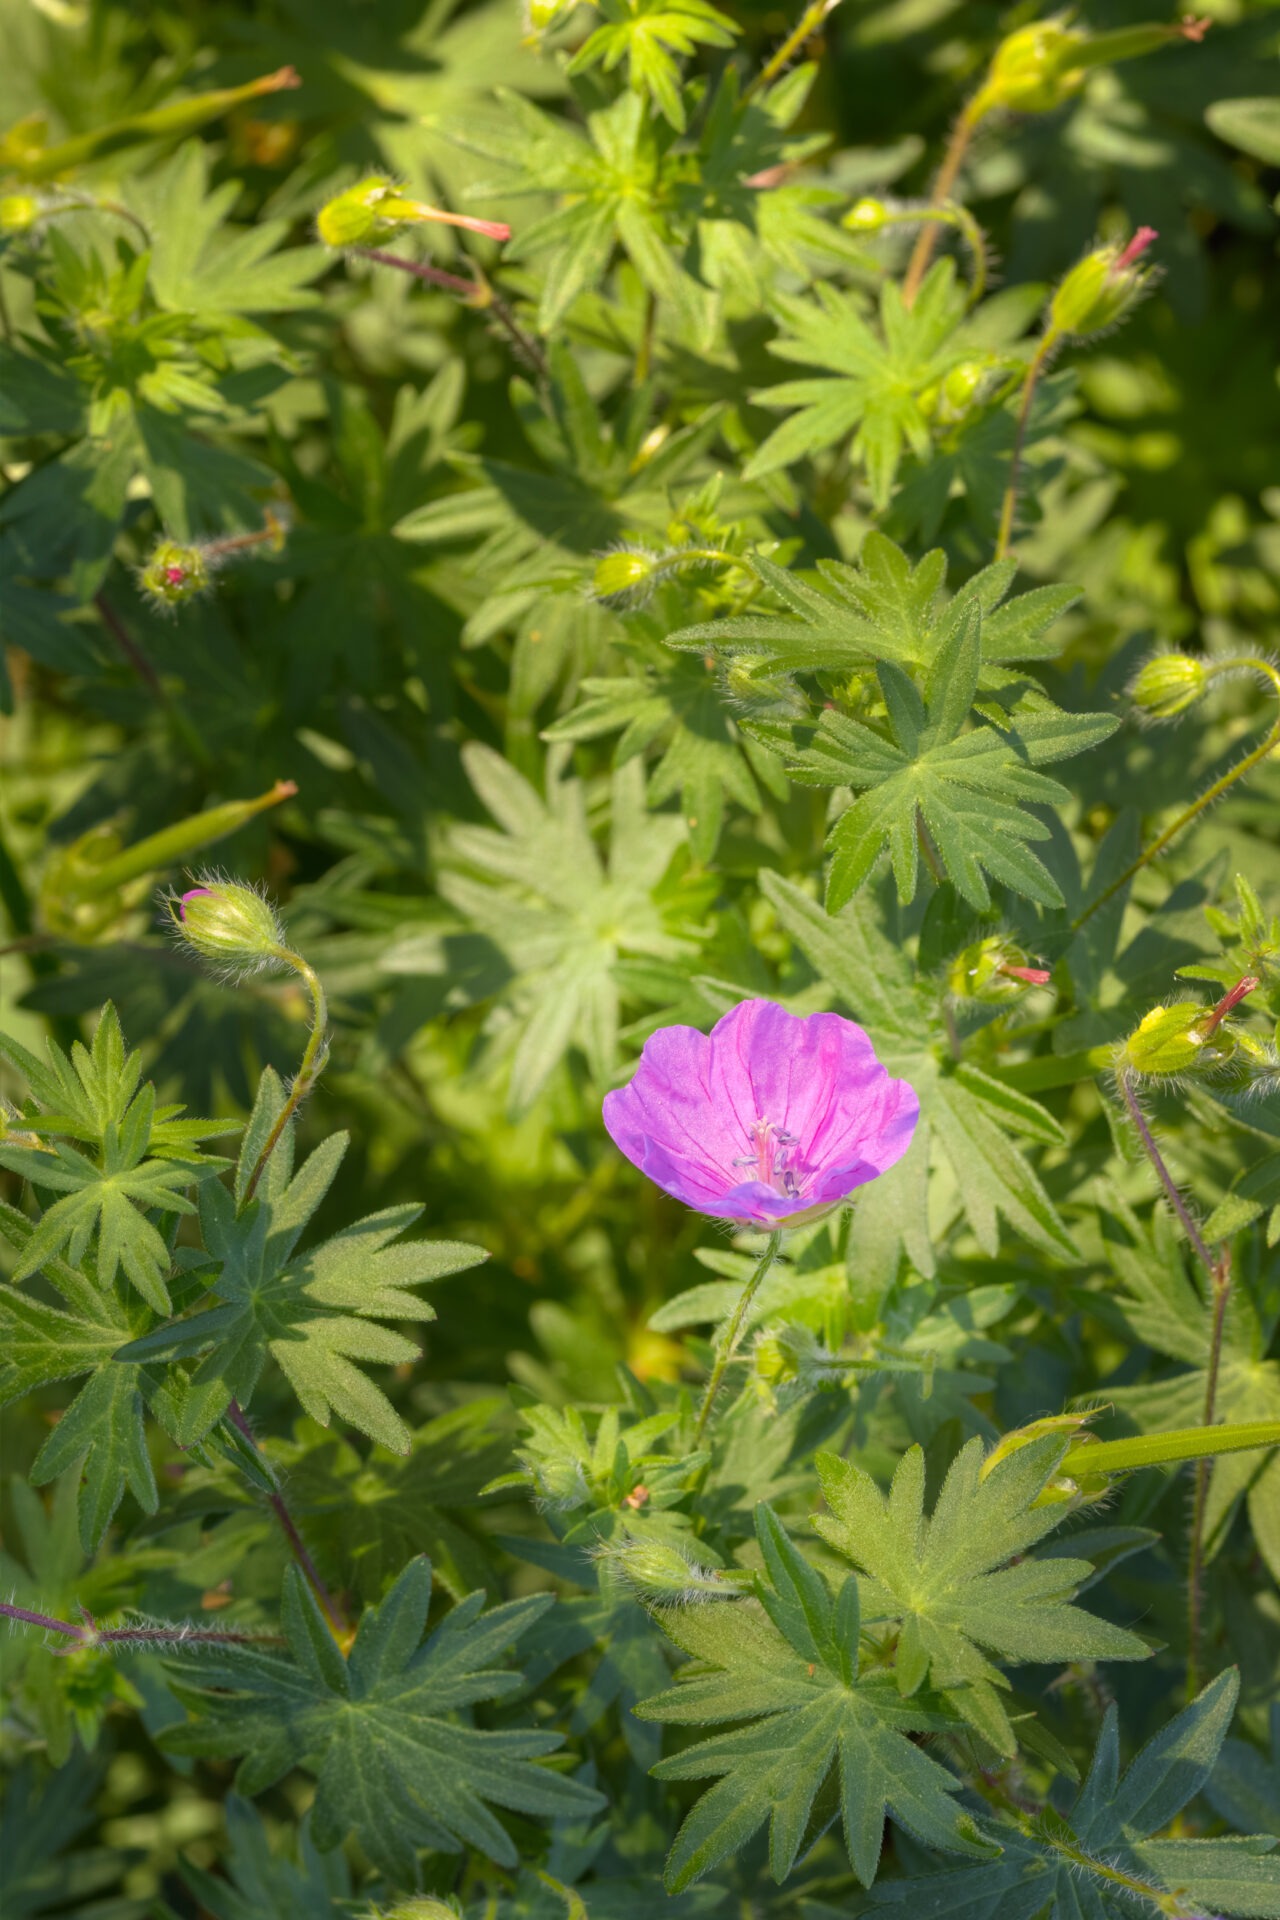 A vibrant pink wildflower stands out amidst green foliage under bright sunlight, with several buds surrounding it, showcasing nature's beauty and diversity.